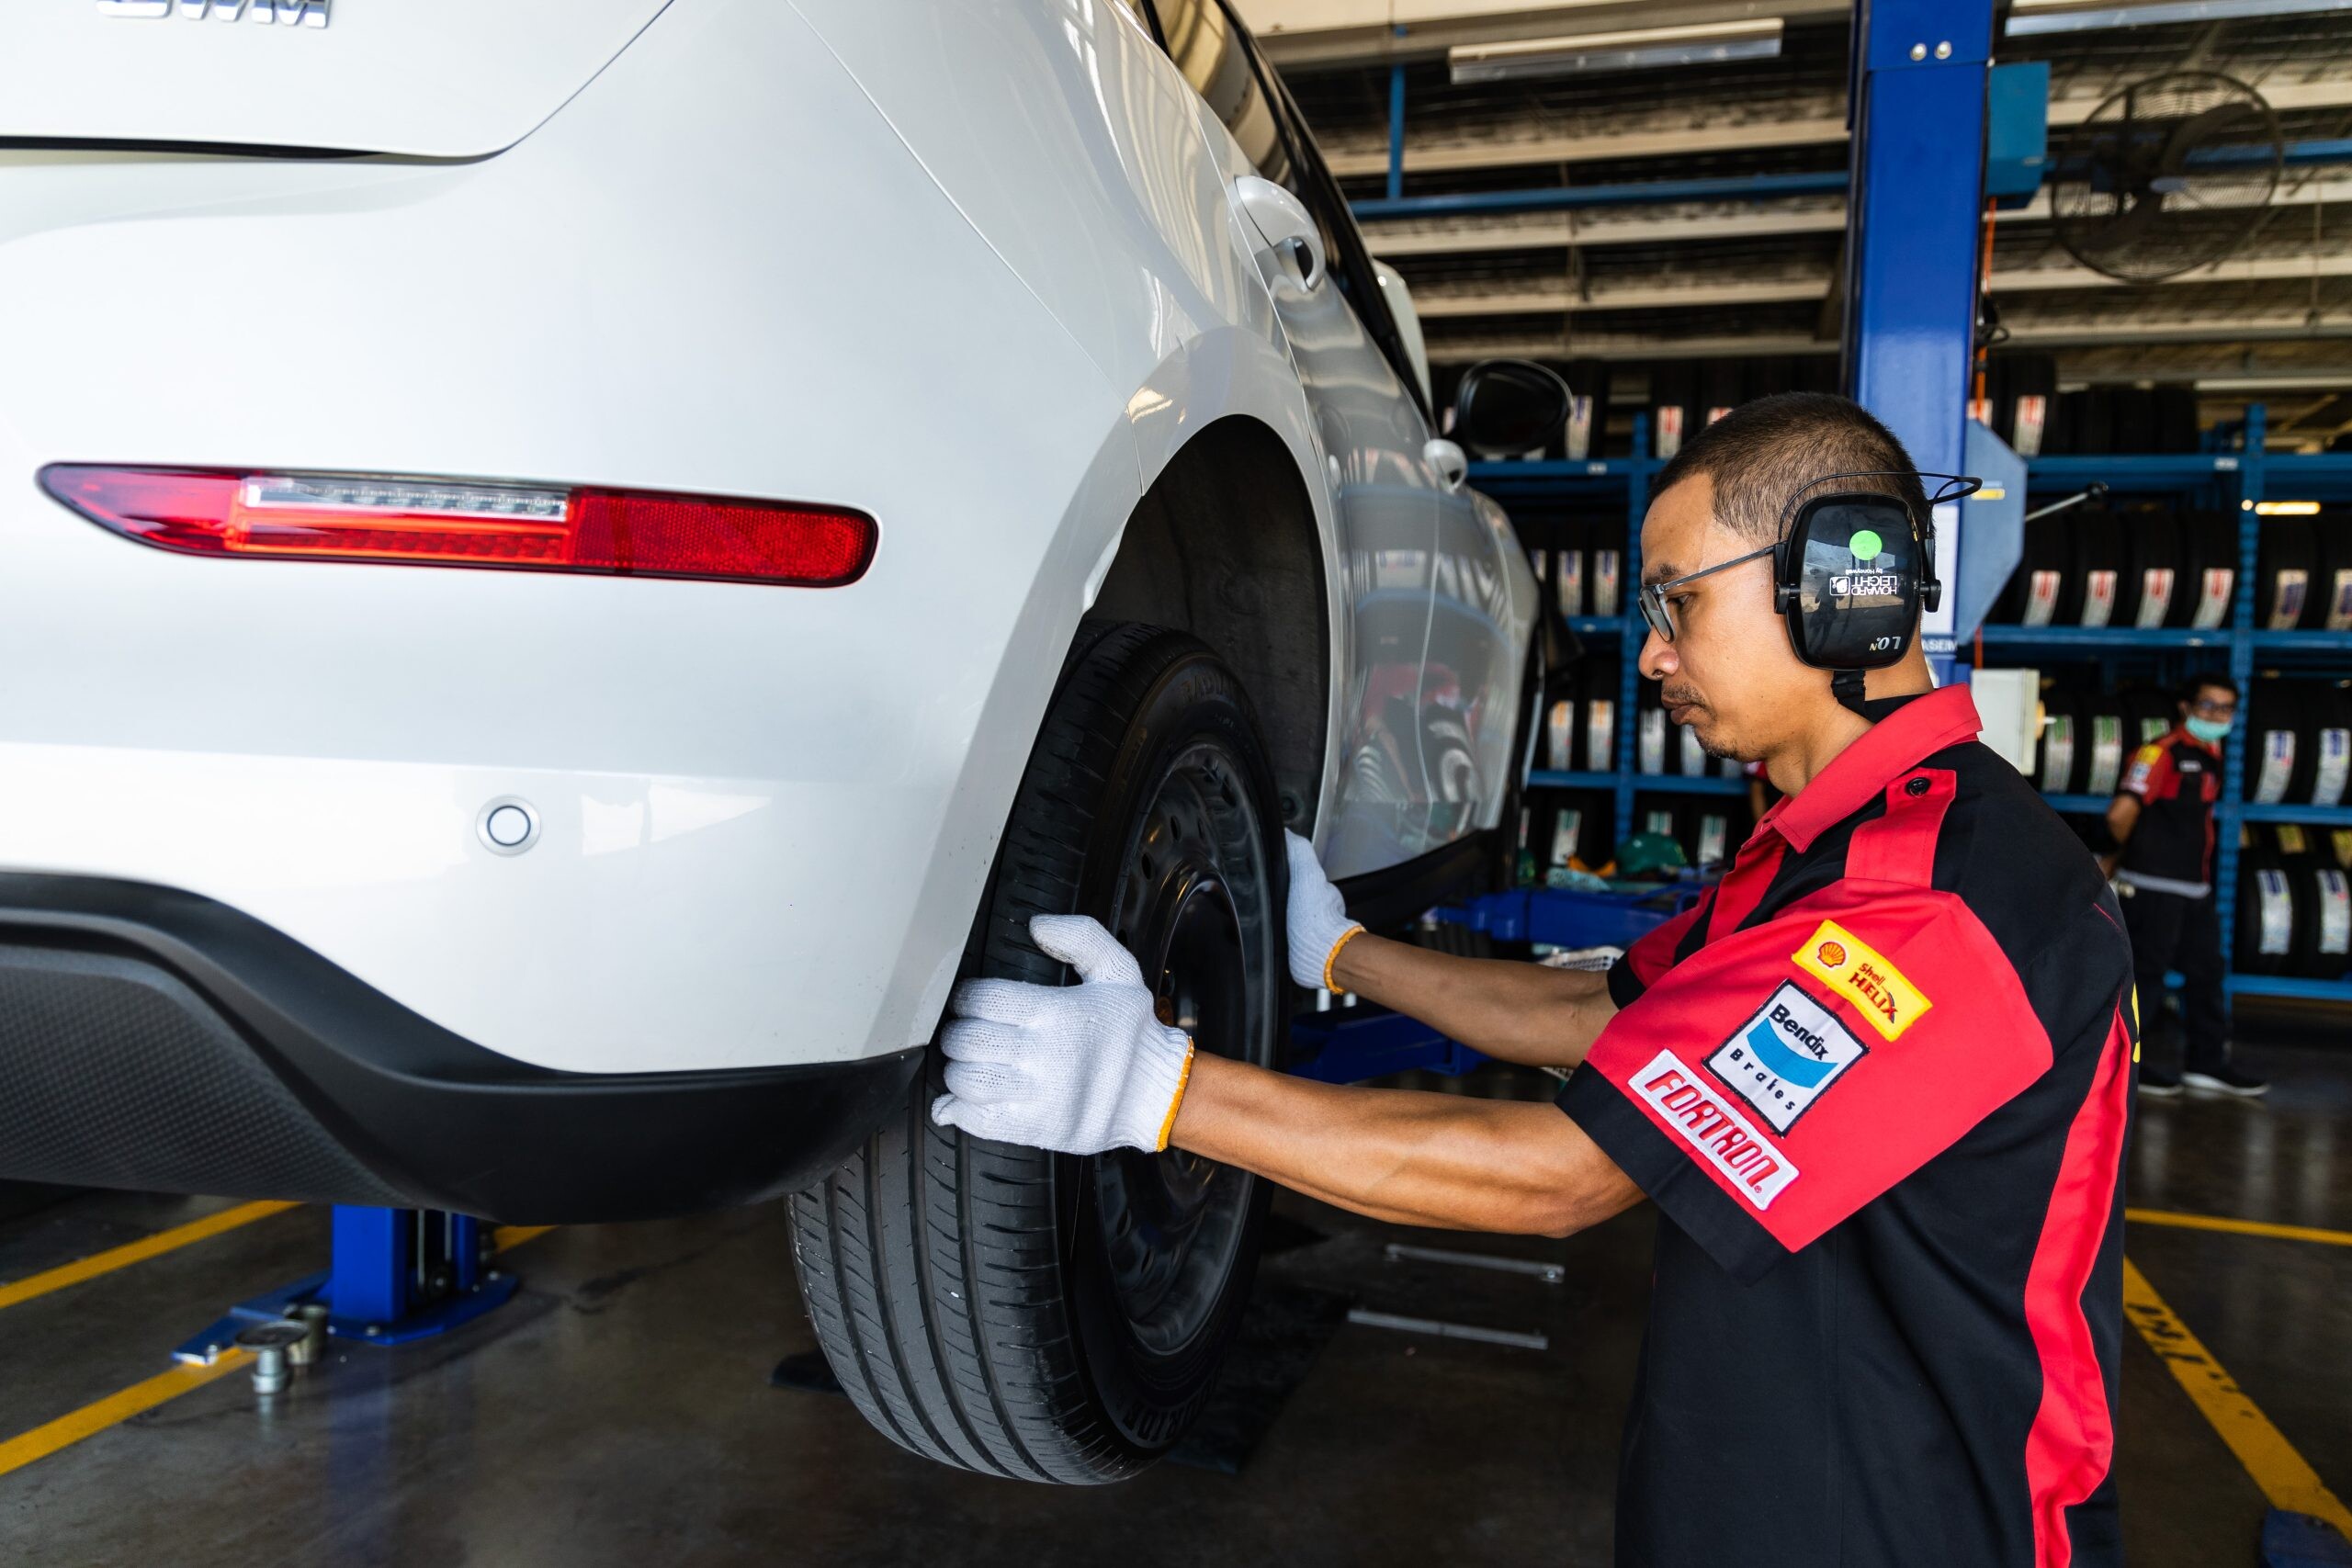 COCKPIT Promptly Provides Tire Service and Maintenance for EV Cars, Reaching 16 Key Branches with Delivering Exquisite Impression and Supporting the Growth of EV Market